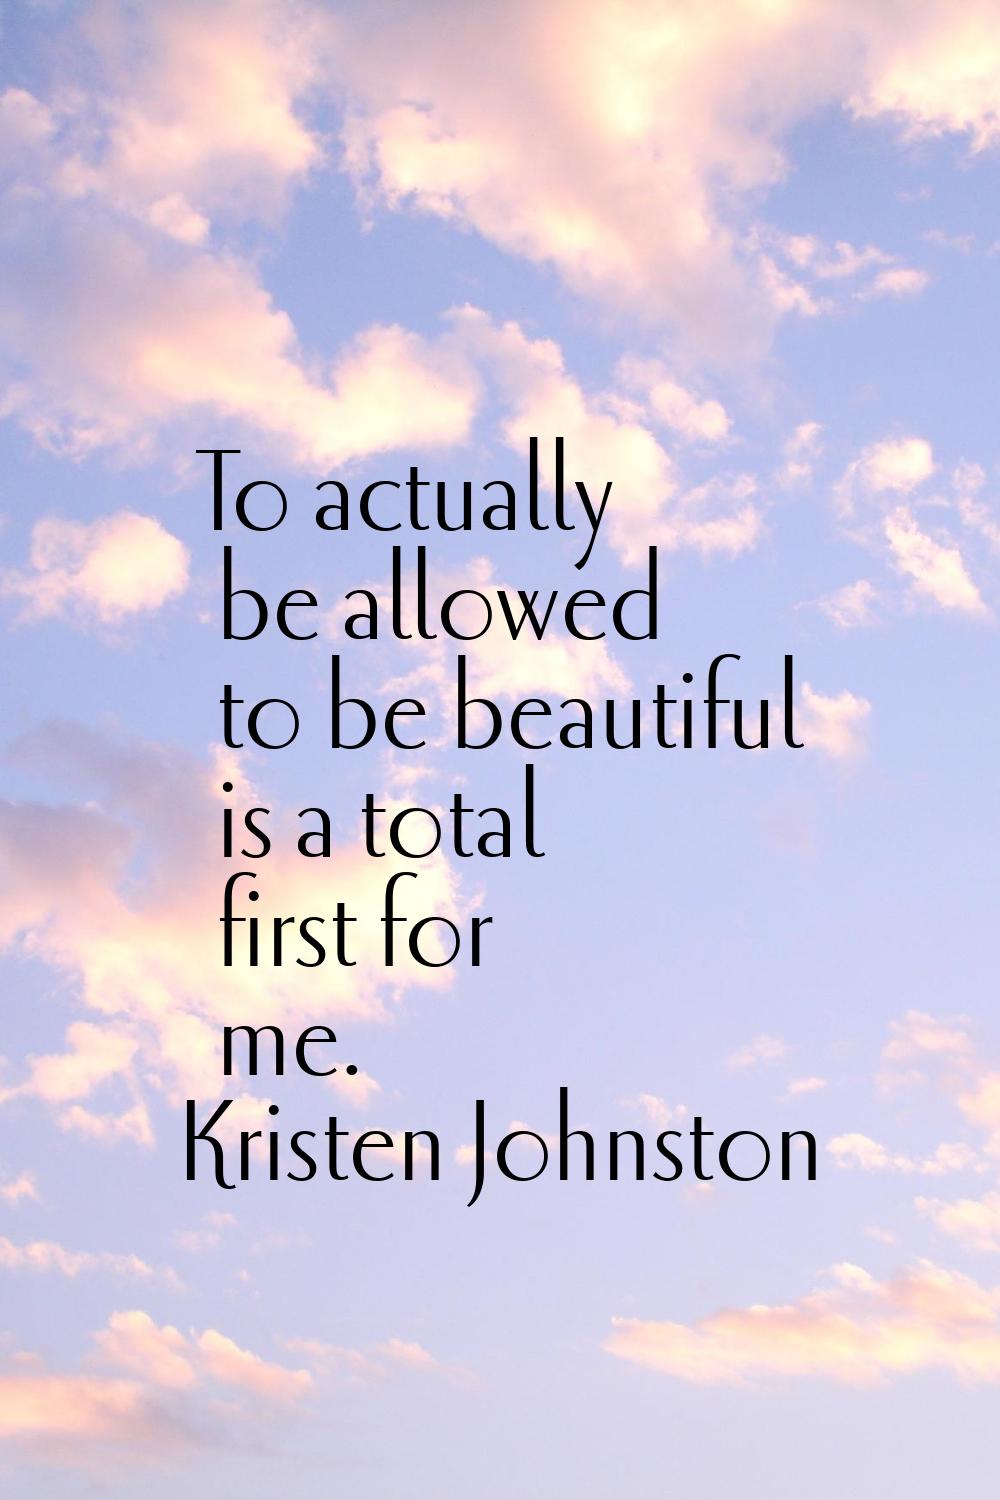 To actually be allowed to be beautiful is a total first for me.